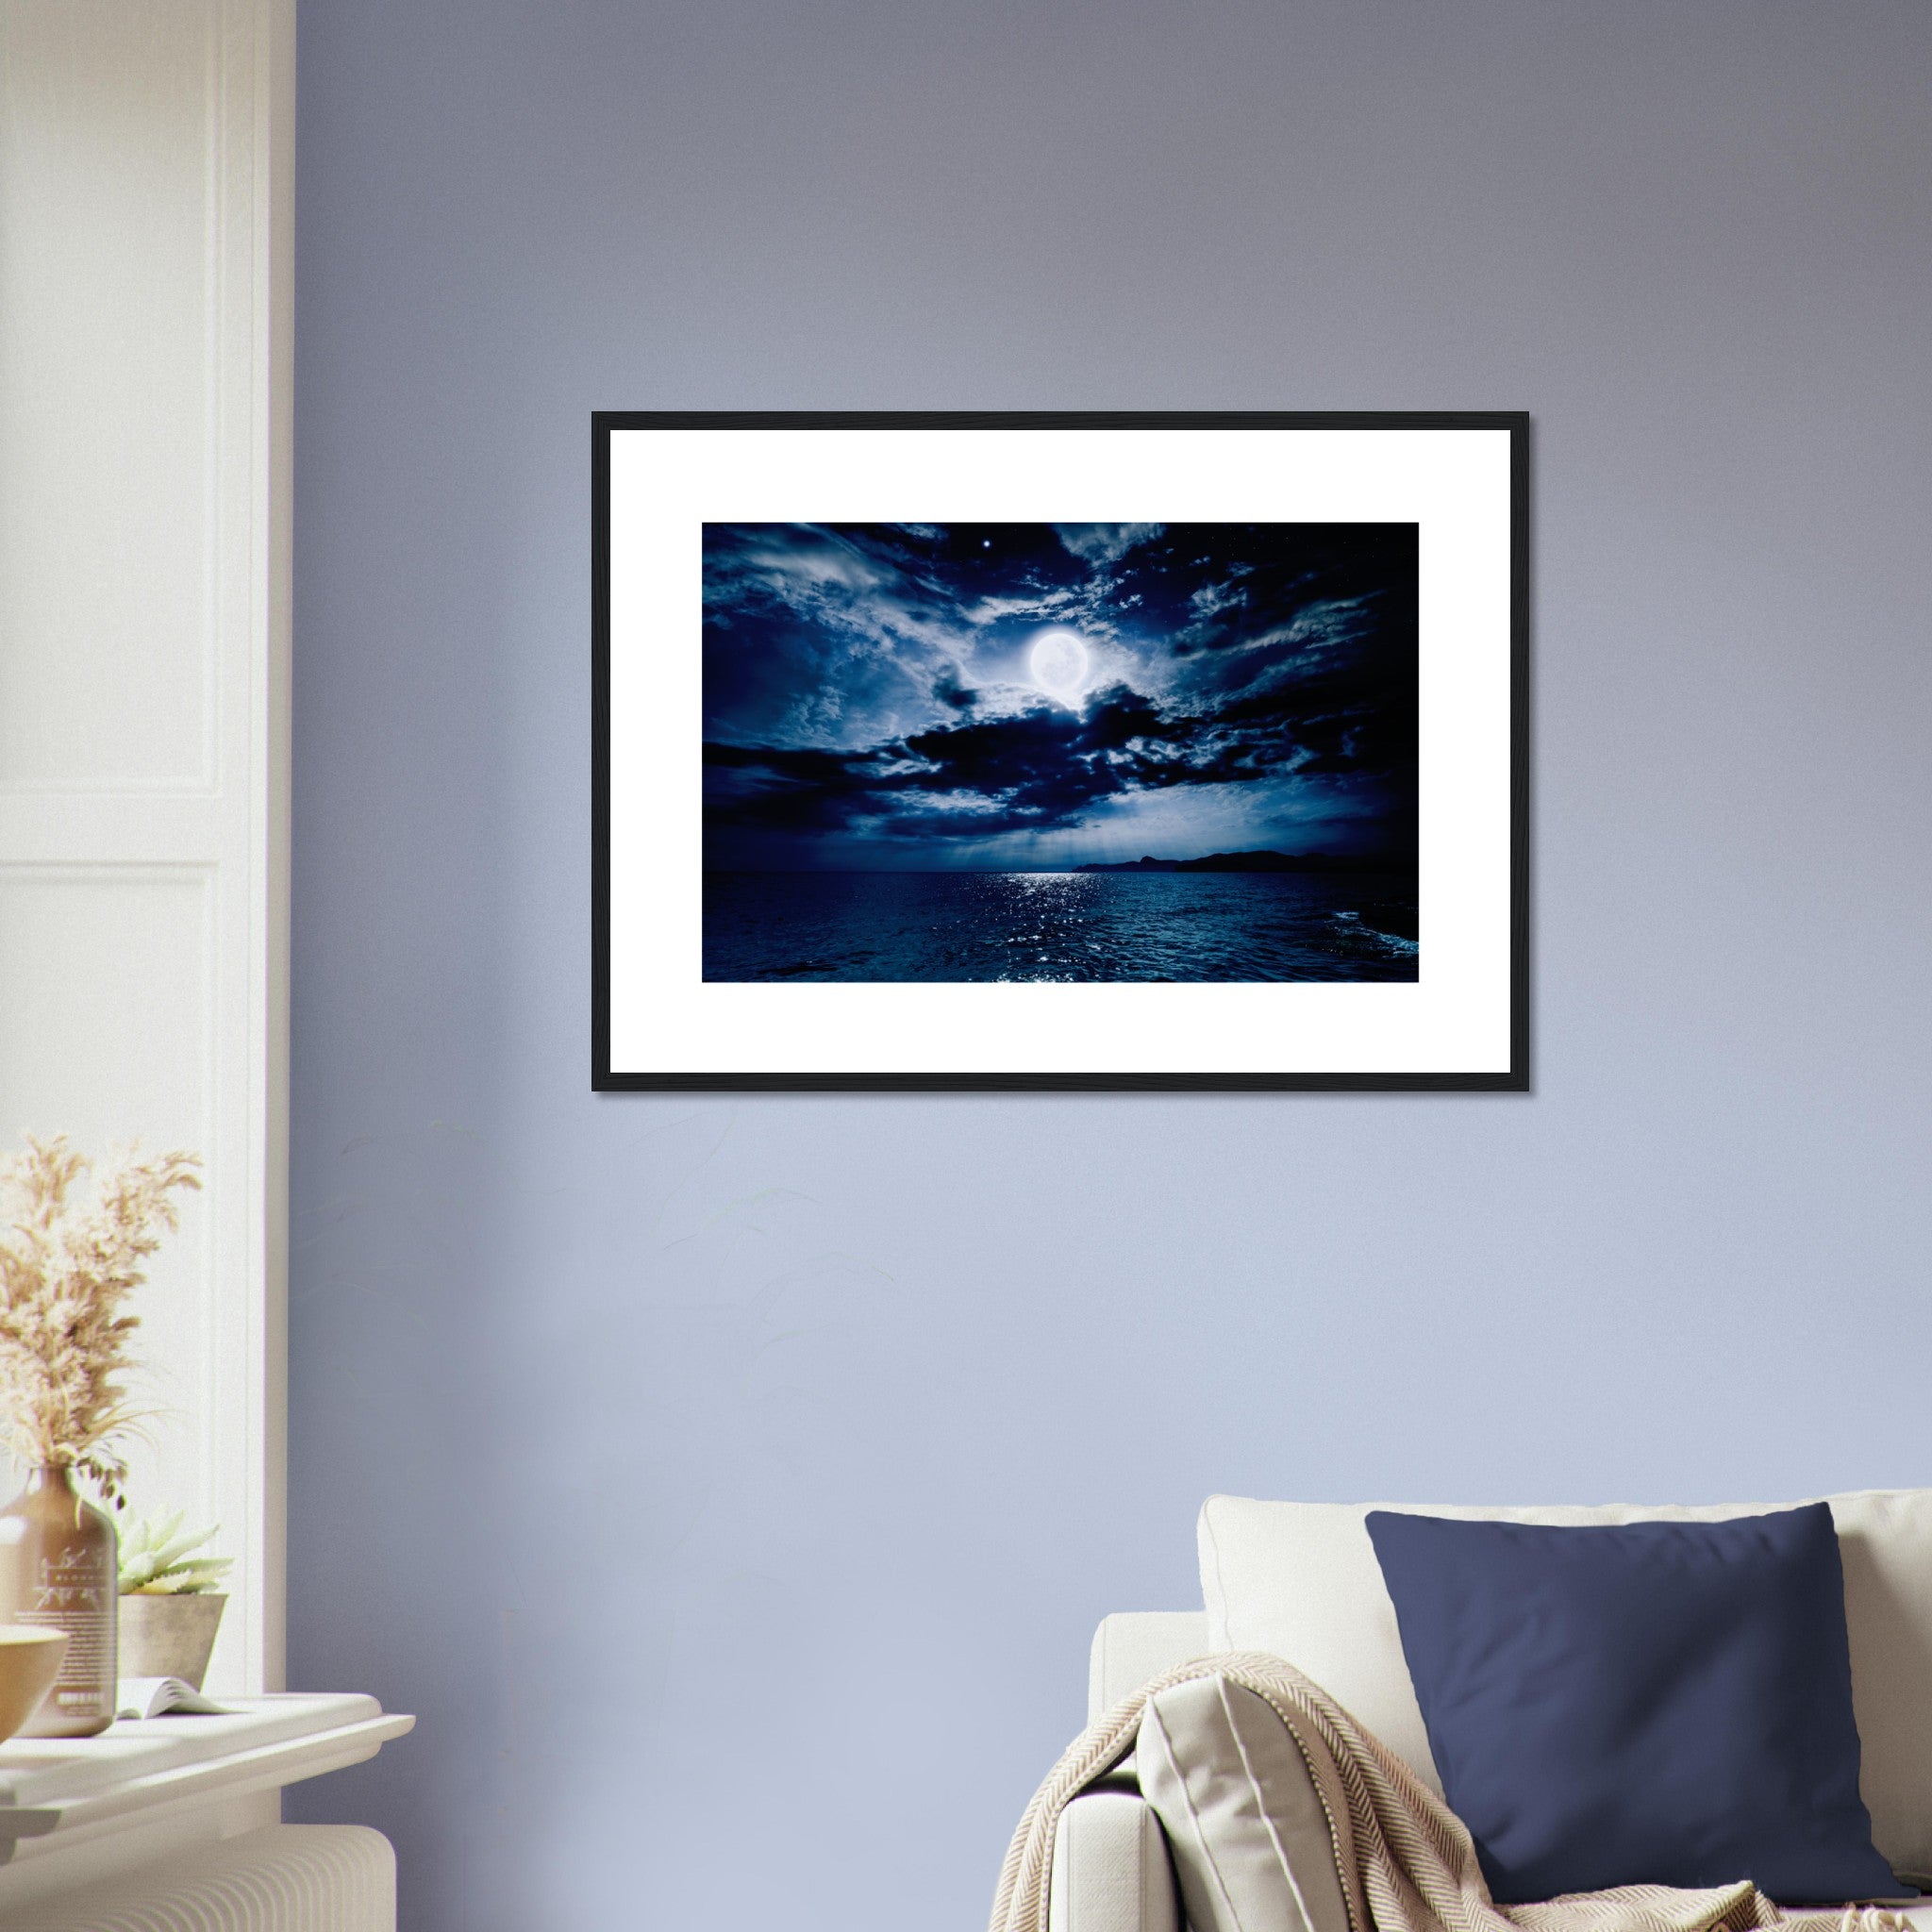 Full Moon Over Sea Poster